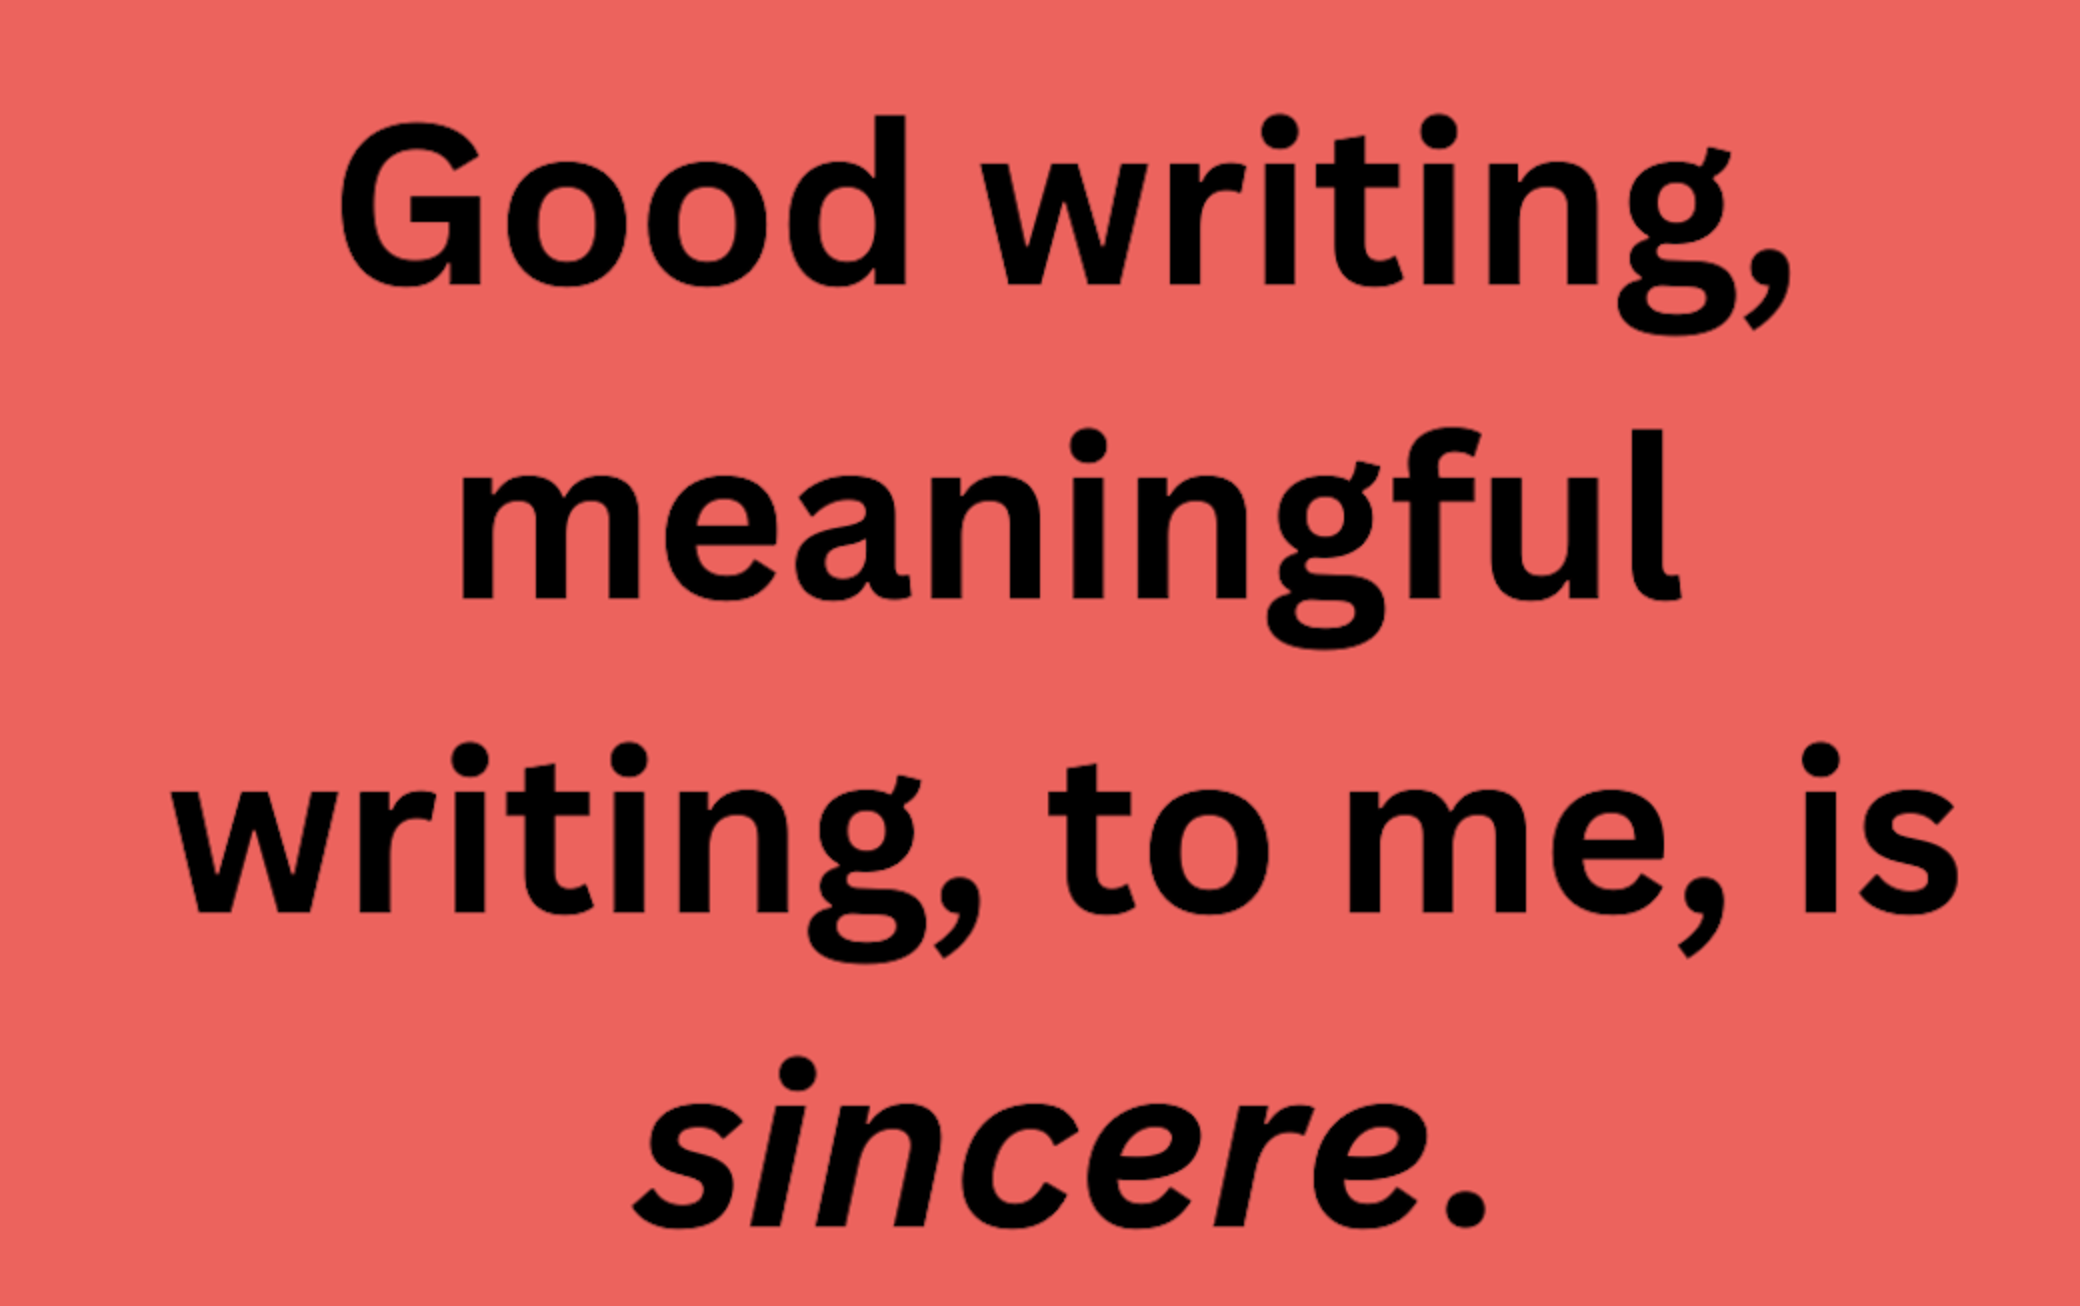 Good writing, meaningful writing, to me, is sincere. - Jasmine Liang